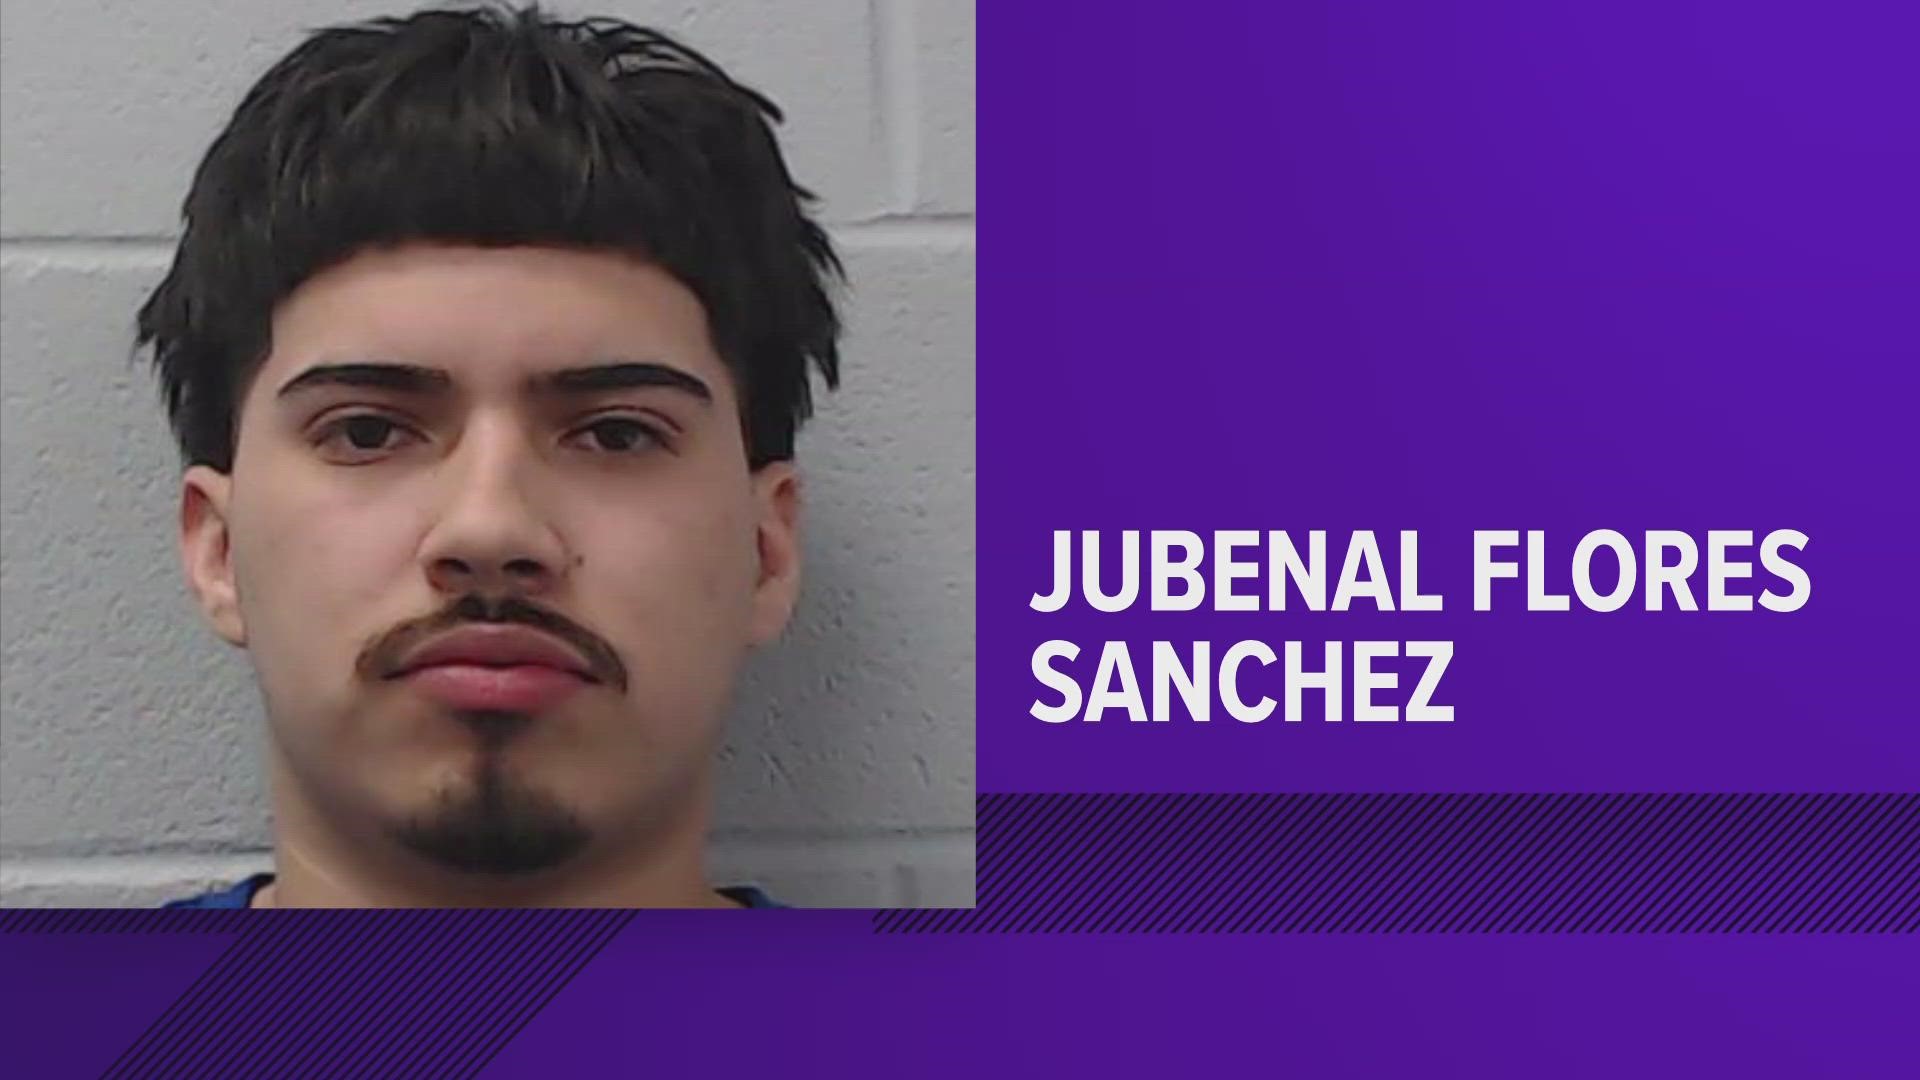 Jubenal Flores Sanchez was arrested following an investigation involving delivery of fentanyl and the death of a minor in Hays County, the City of Kyle said.